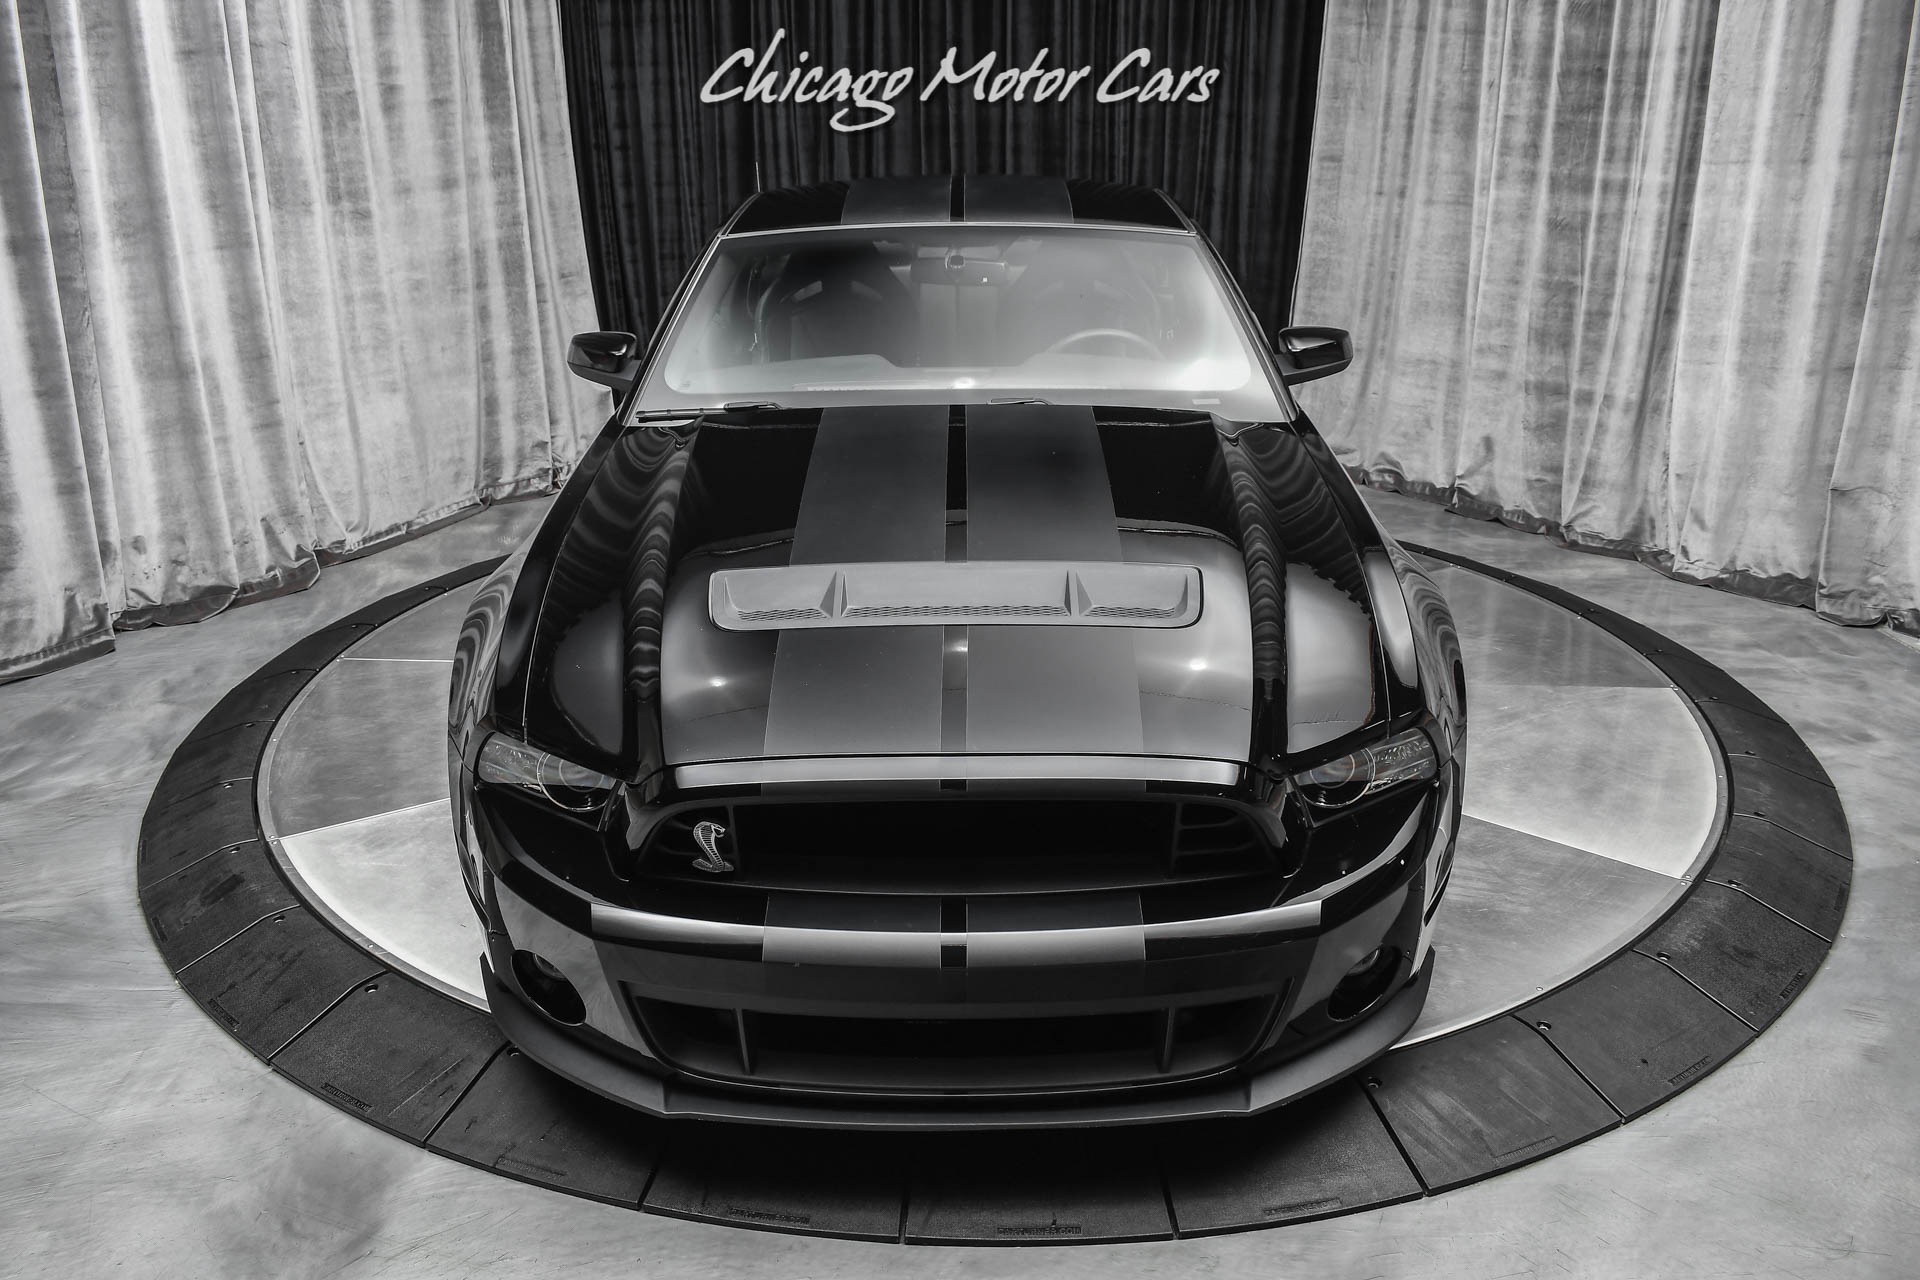 Used-2013-Ford-Shelby-GT500-58L-Built-Motor-907HP-6-Speed-Manual-Huge-Upgrades